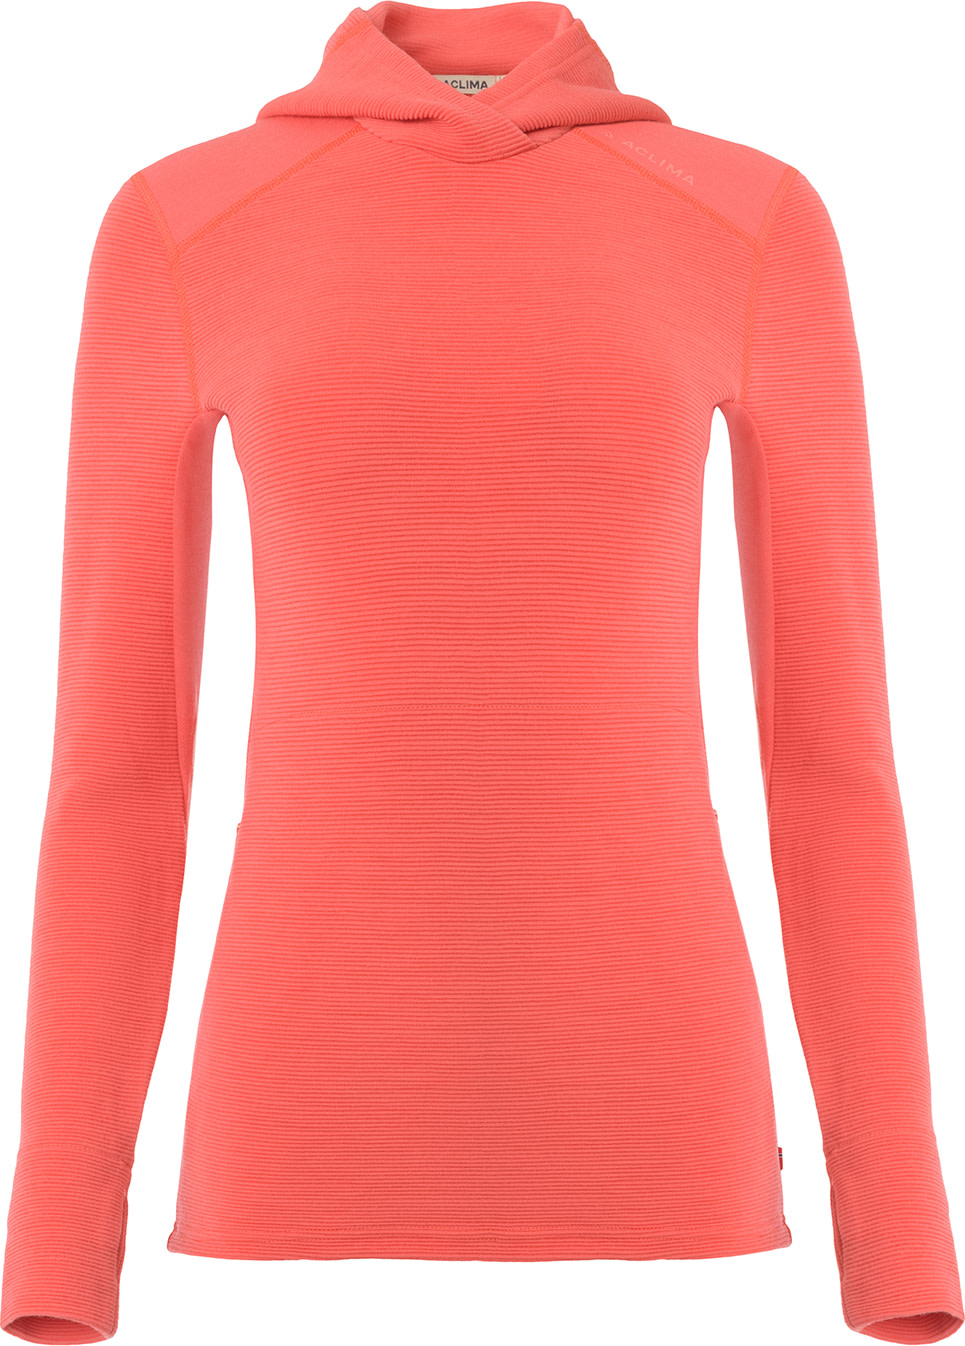 Aclima Aclima Women's StreamWool Hoodie Spiced Coral L, Spiced Coral